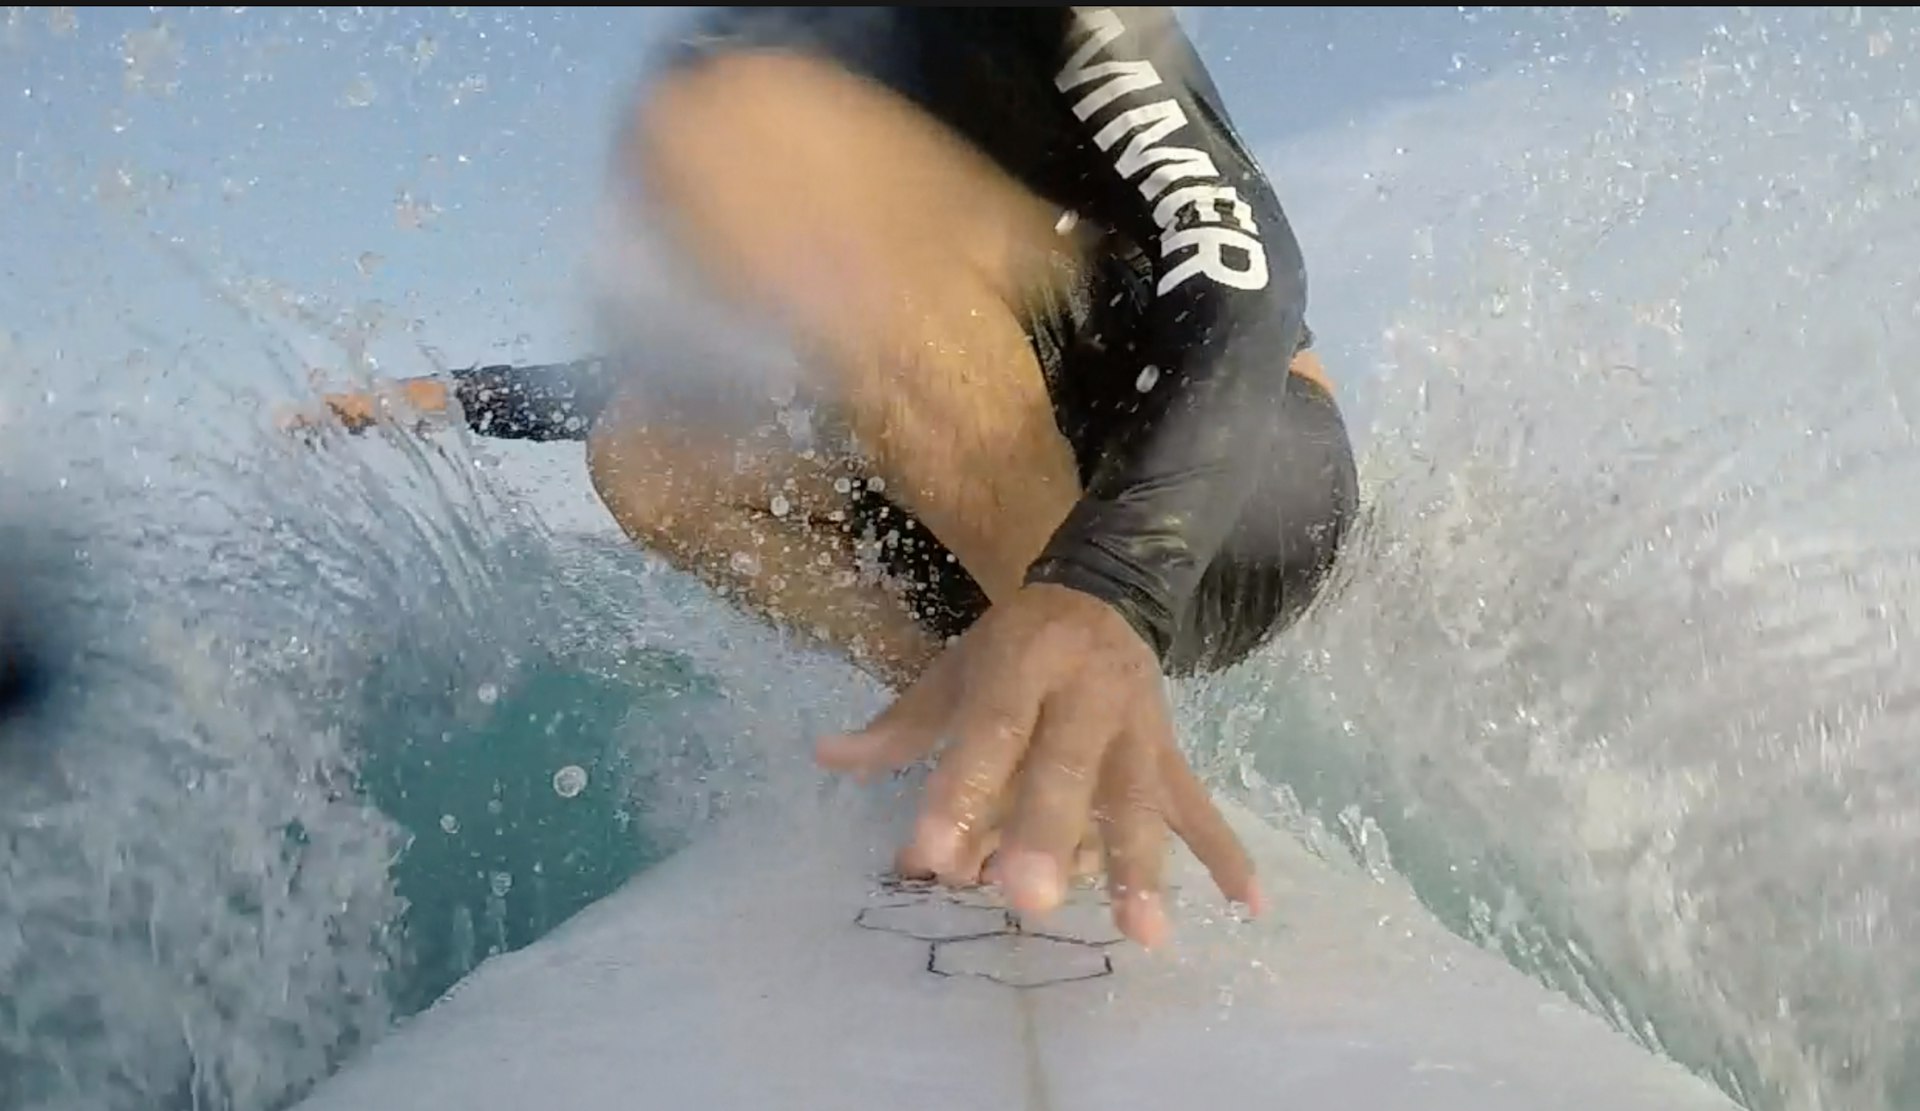 Sultans, 5-star luxury and the boogie wave rat: Surfing in the Maldives with Jamie Brisick